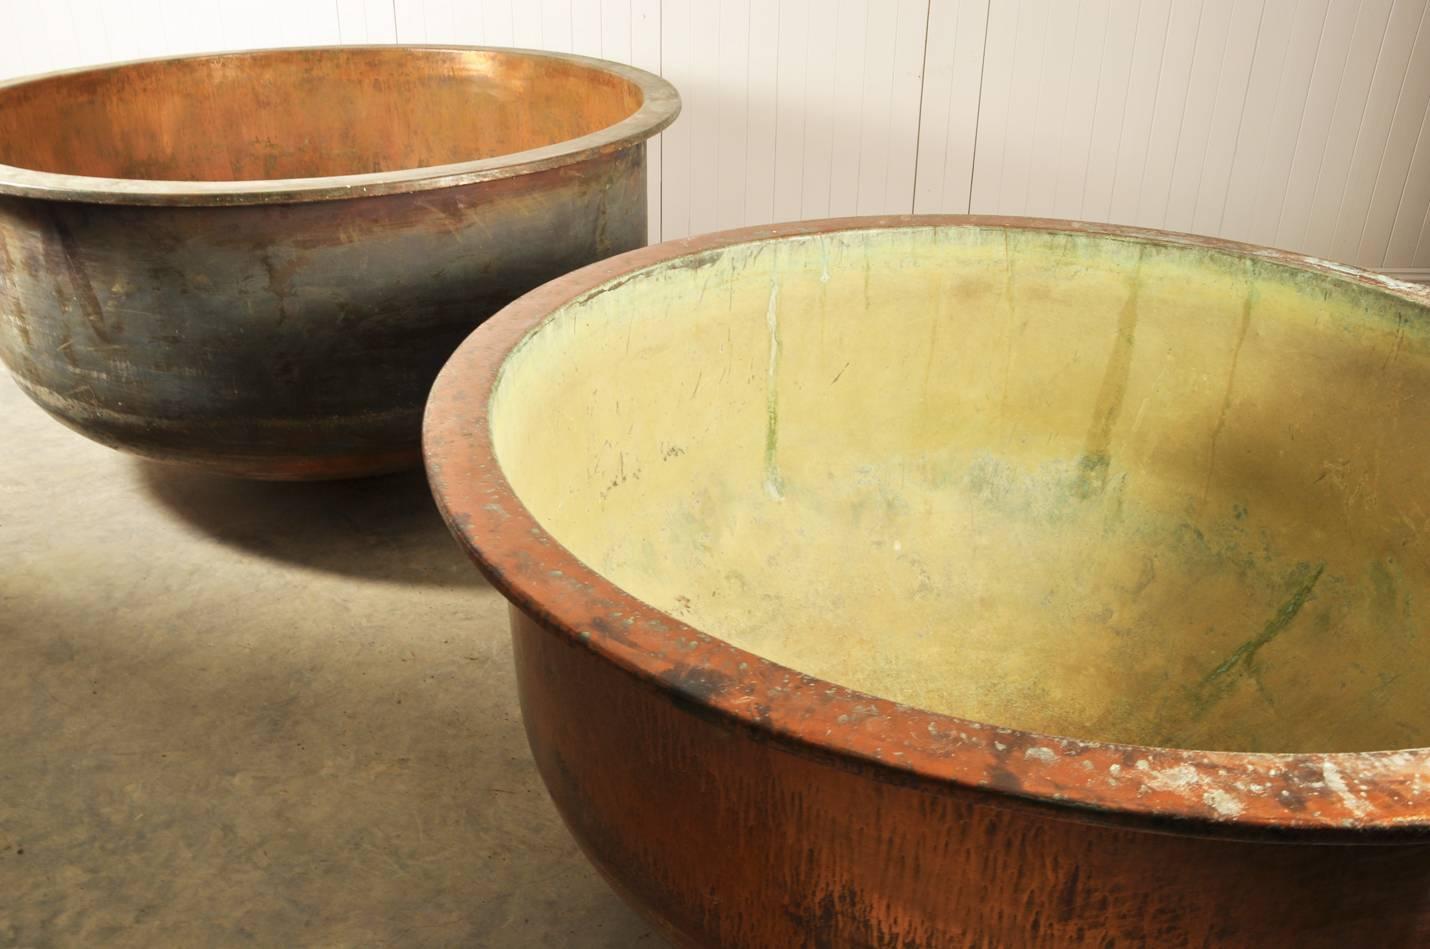 These impressive copper bowls are circa 1880 and were sourced in Provence where they were used in cheese making.

In great condition with some lovely natural verdigris patina. Both are very much water tight.

We love these as a sculptural piece in a